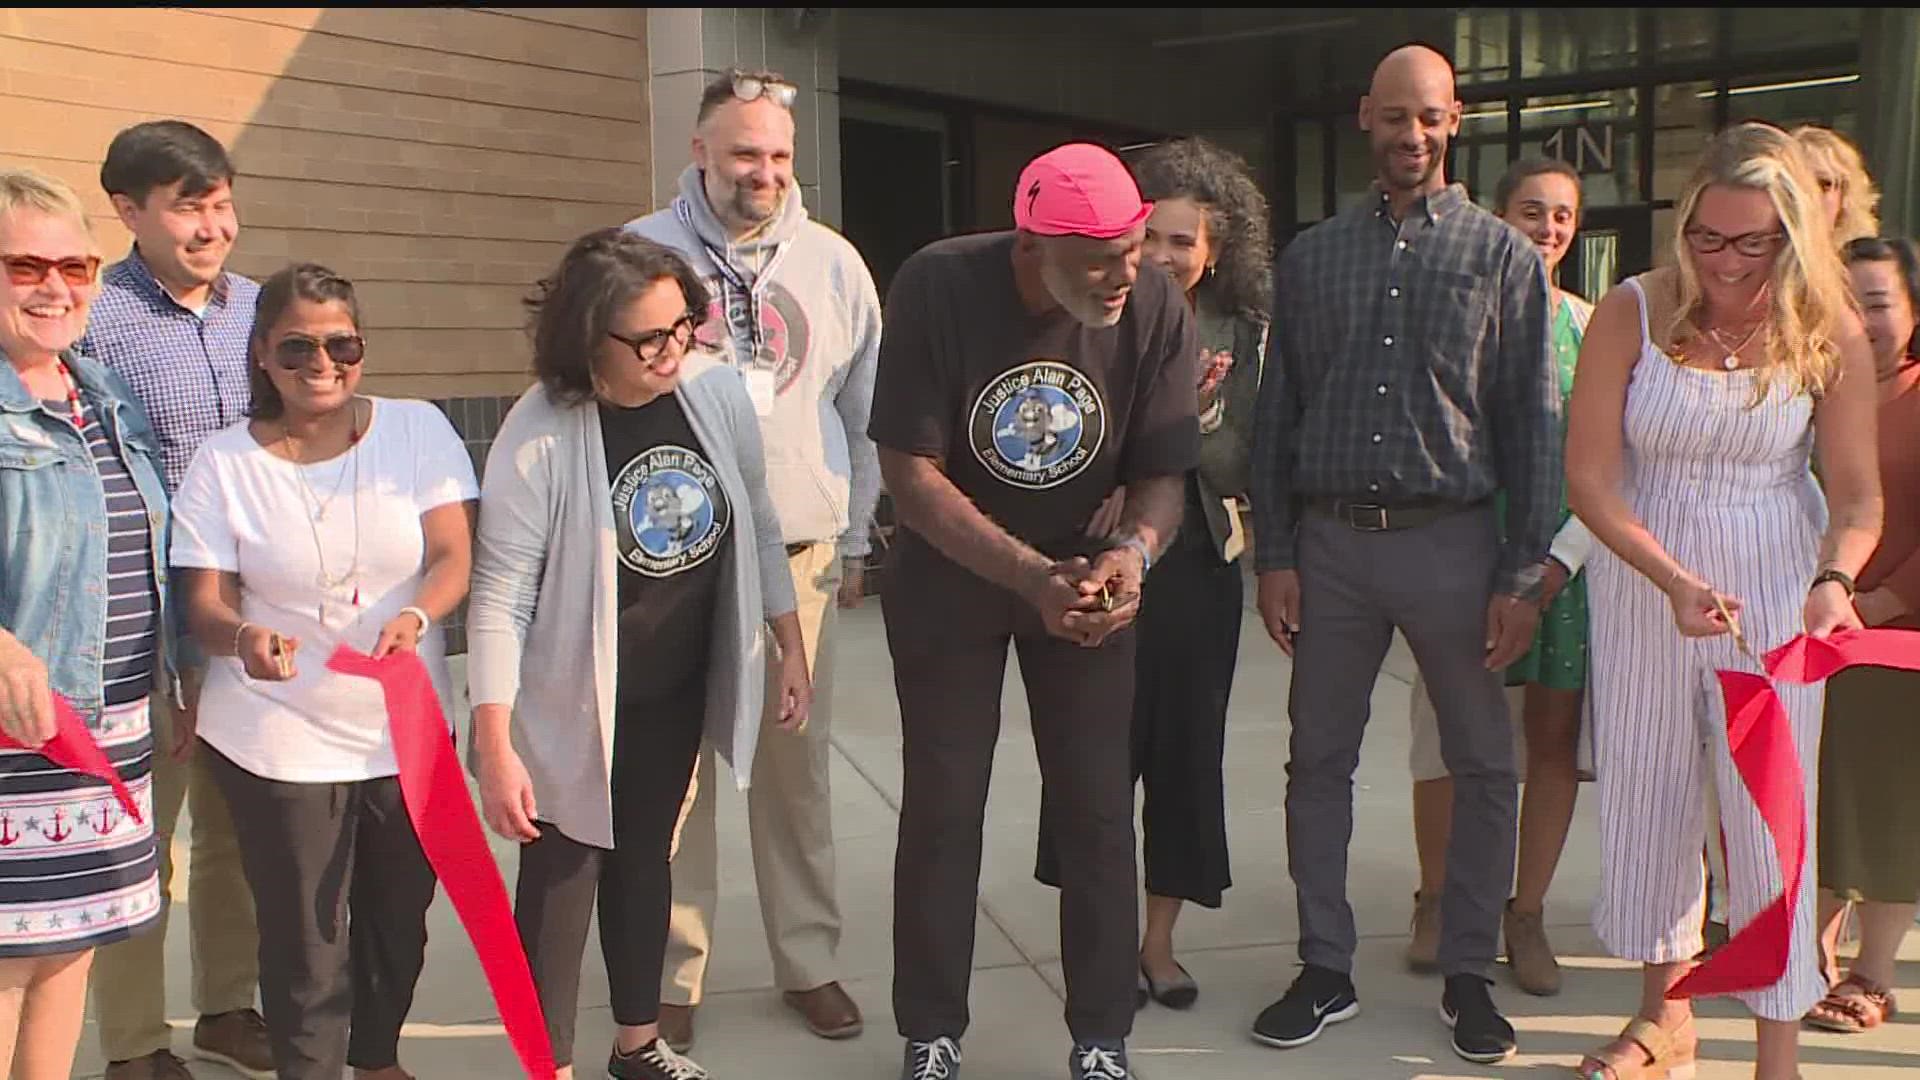 Vikings Hall of Famer and former Minnesota Supreme Court Justice Alan Page was on hand to cut the ribbon and tour the school.